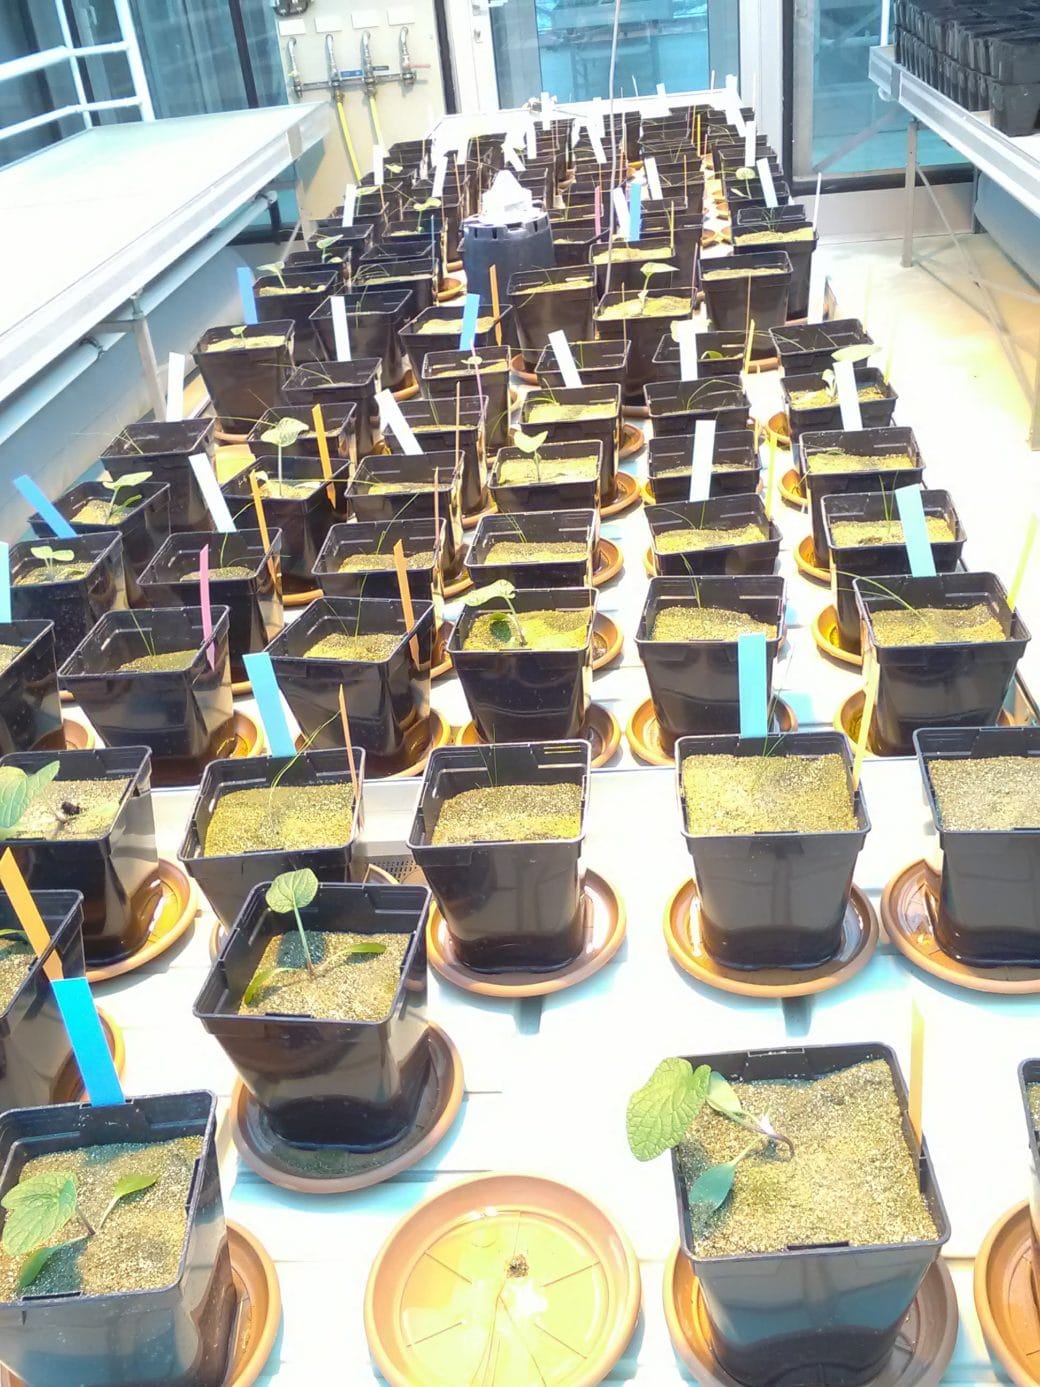 Picture: The photo shows a very long table in a greenhouse, on which about eighty black square plastic flower pots are placed, in which different grassland plants are grown to determine their root morphology. Marking strips in white, blue, yellow or pink are attached to many of the pots